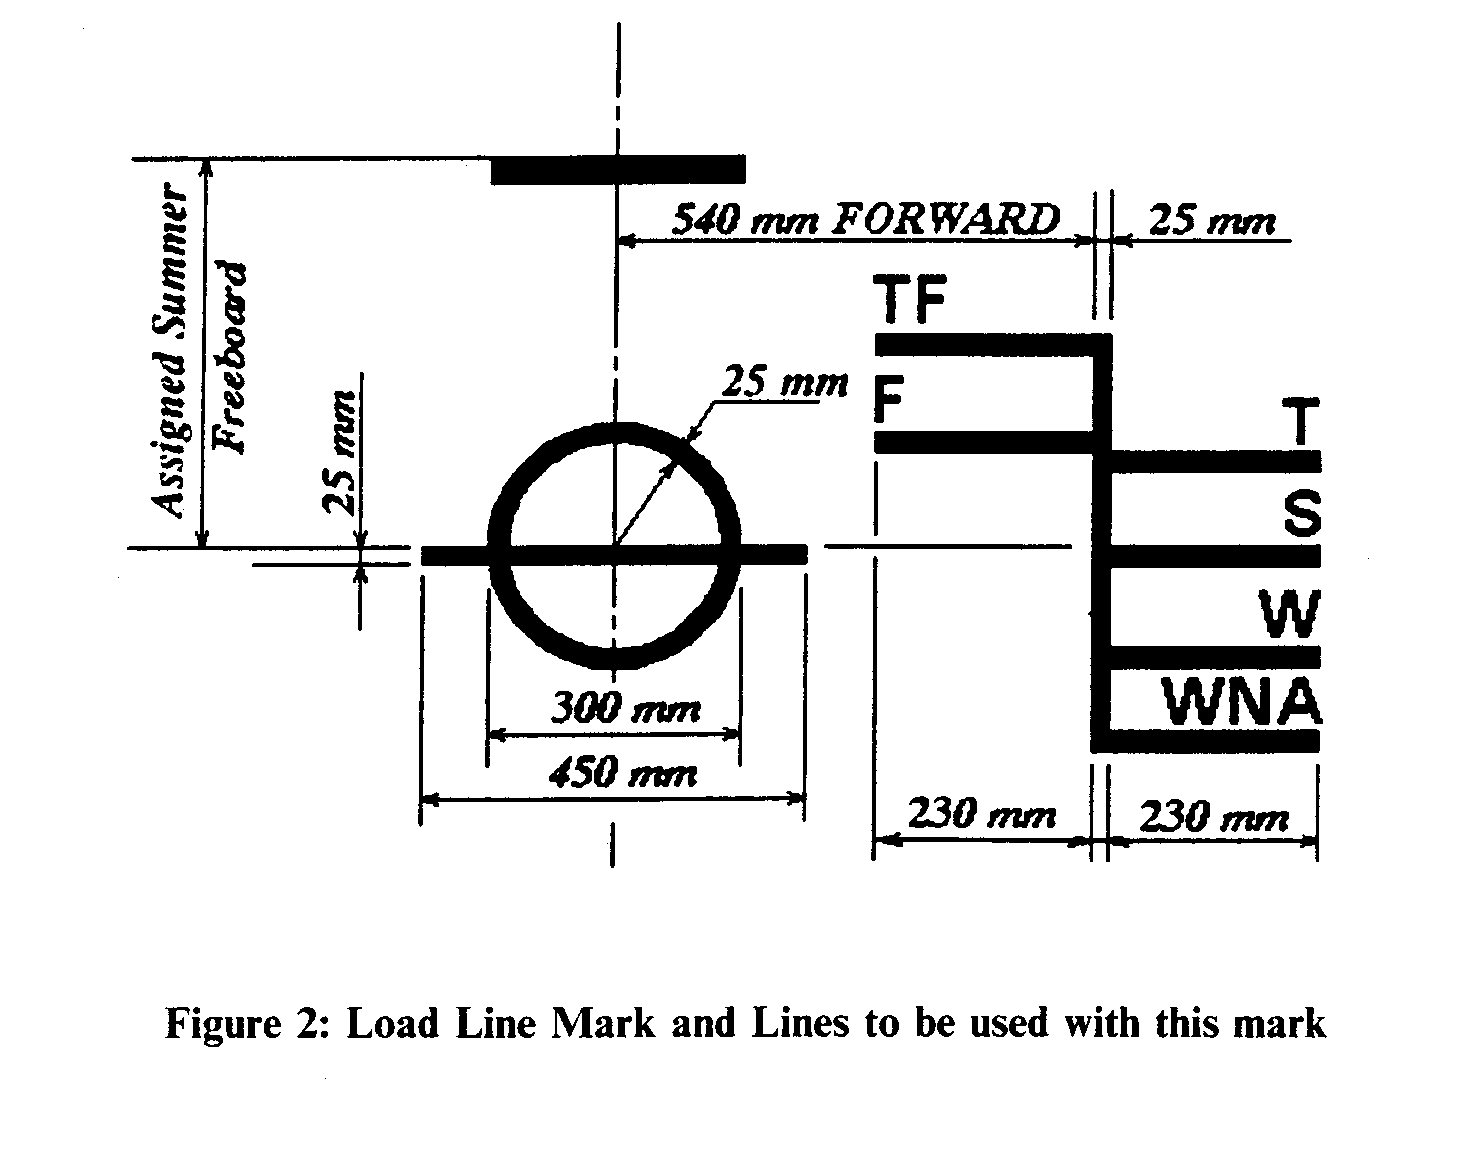 Figure 2 - Load Line Mark and Lines to be used with this mark